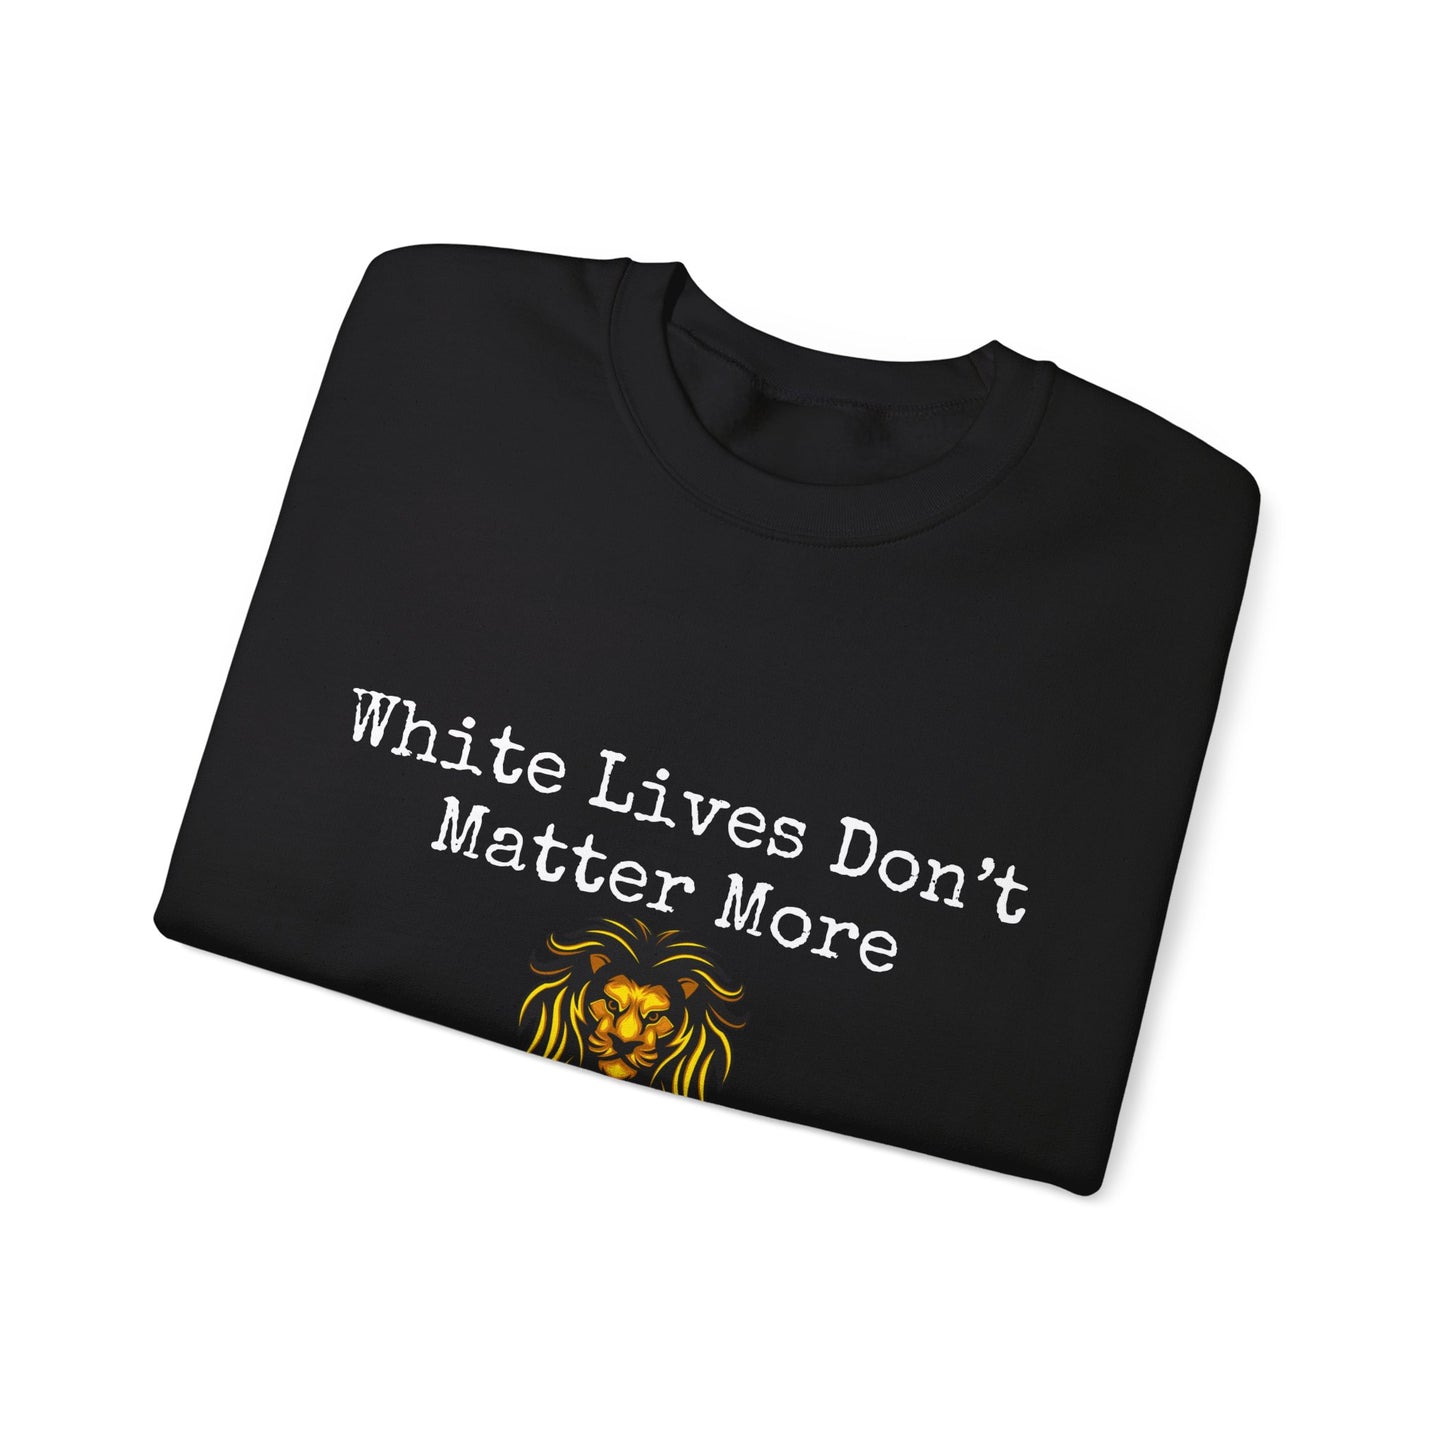 "White Lives Don't Matter More" Crewneck Sweatshirt (Black, with Typed Text, and Graphic)